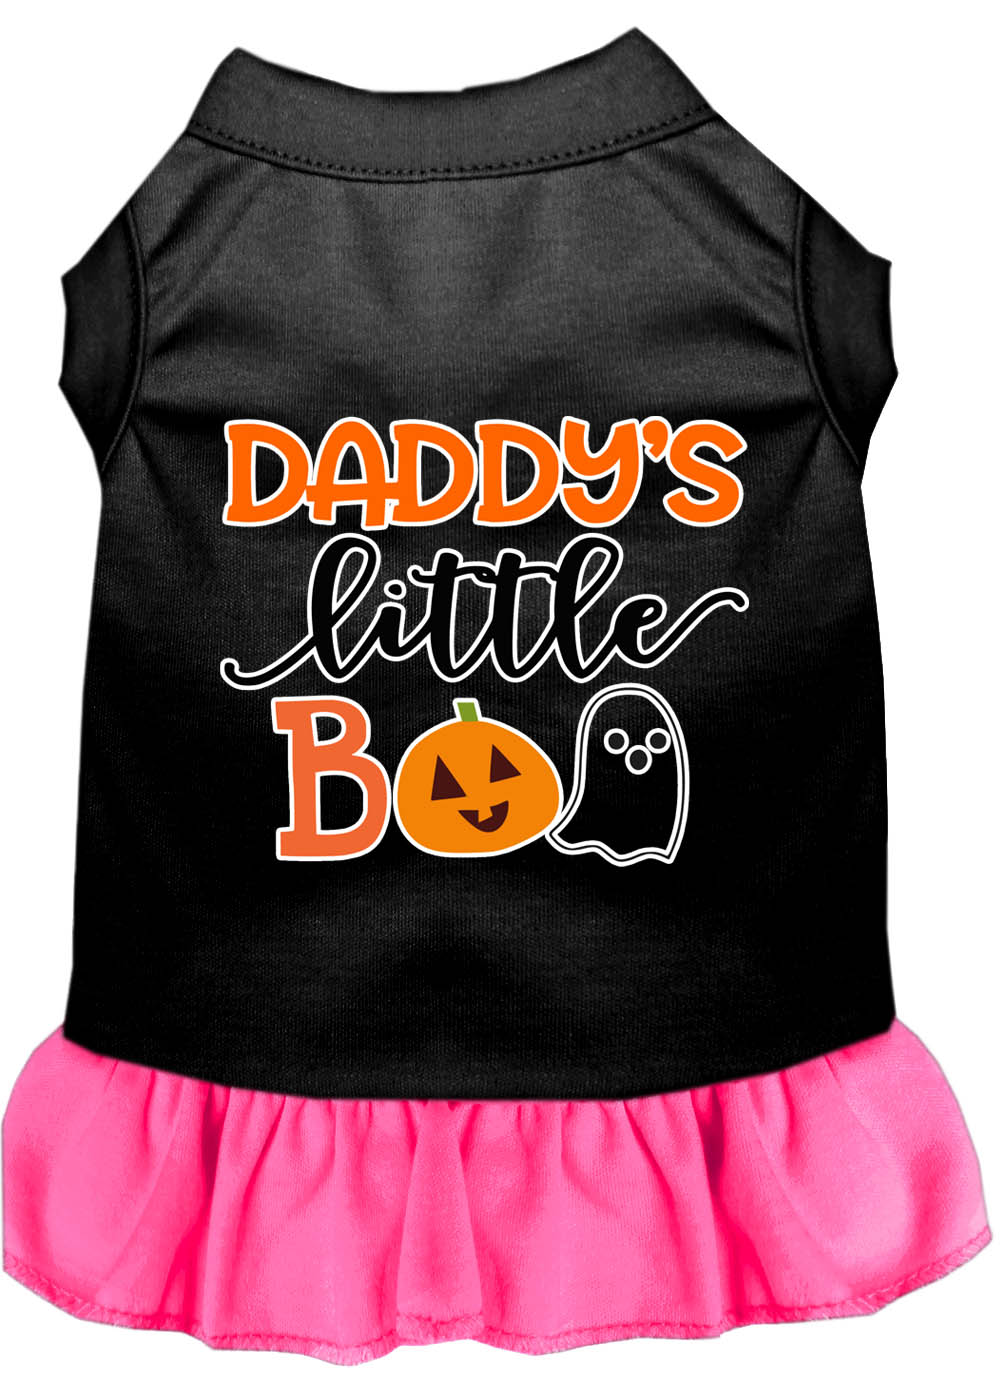 Daddy's Little Boo Screen Print Dog Dress Black with Bright Pink Lg